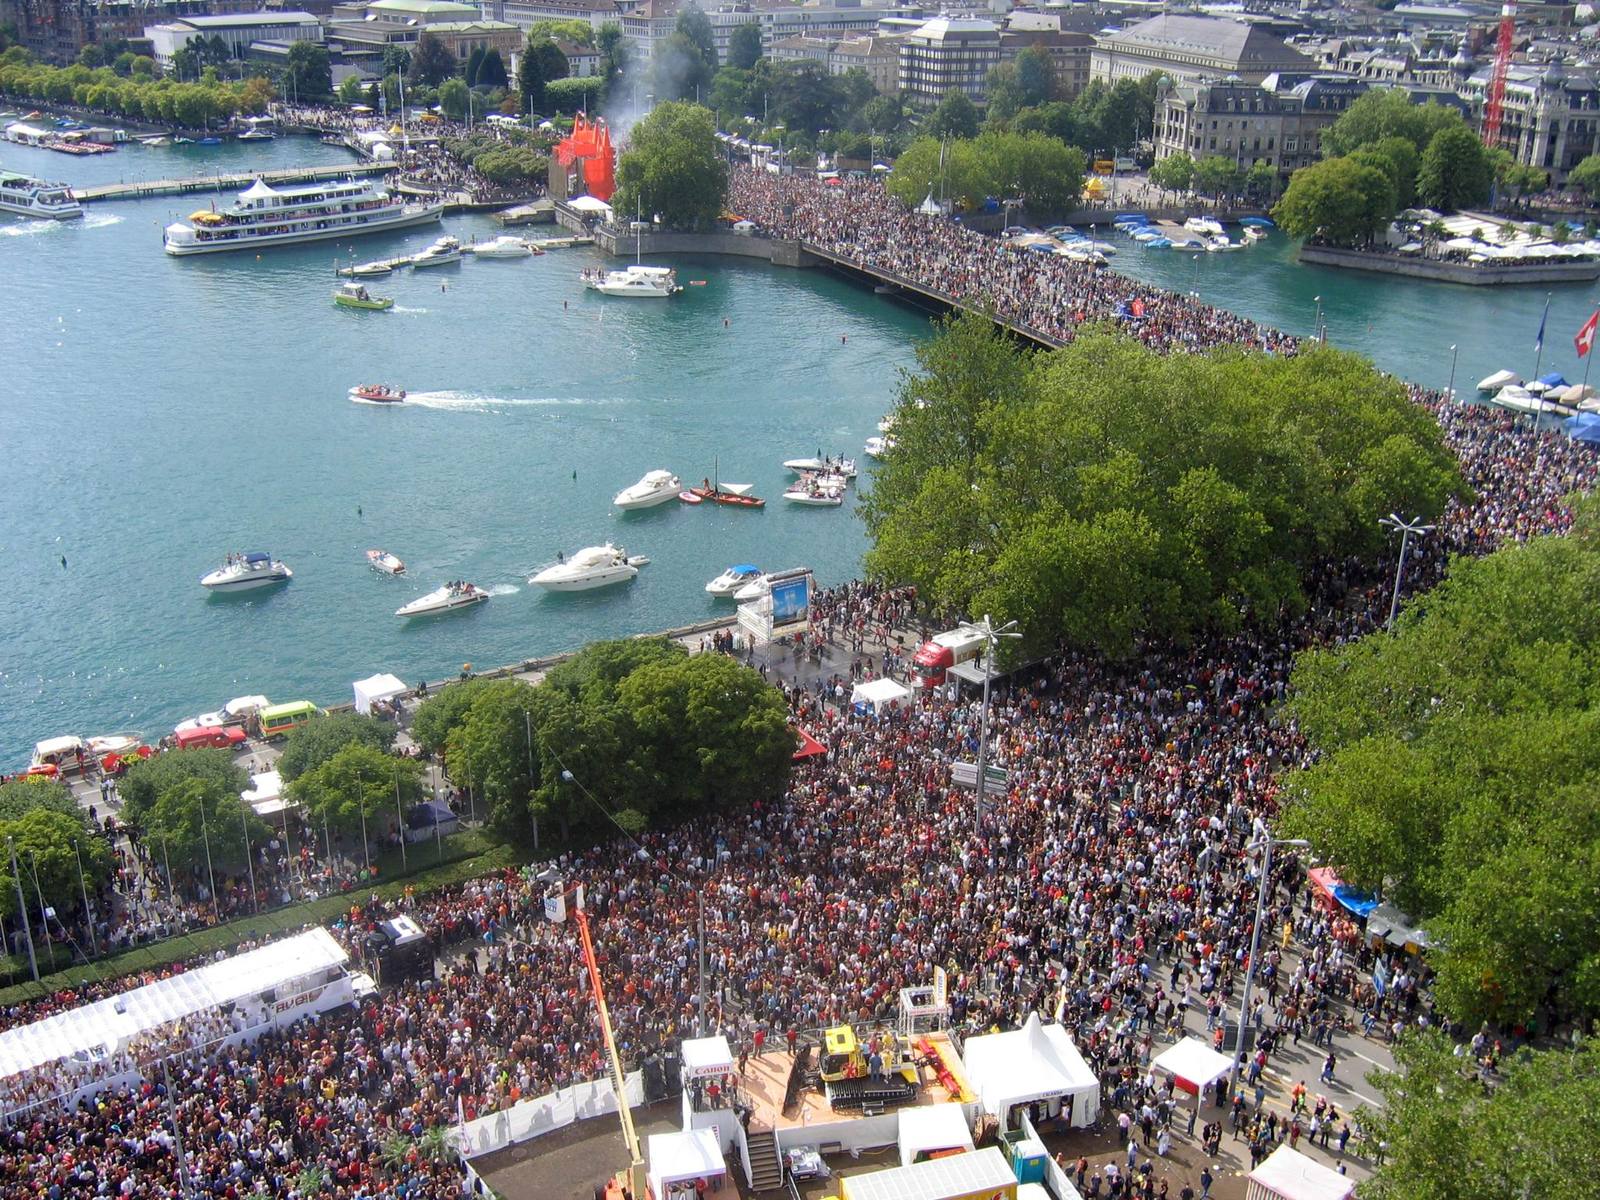 an overhead view of a crowded outdoor event in the city